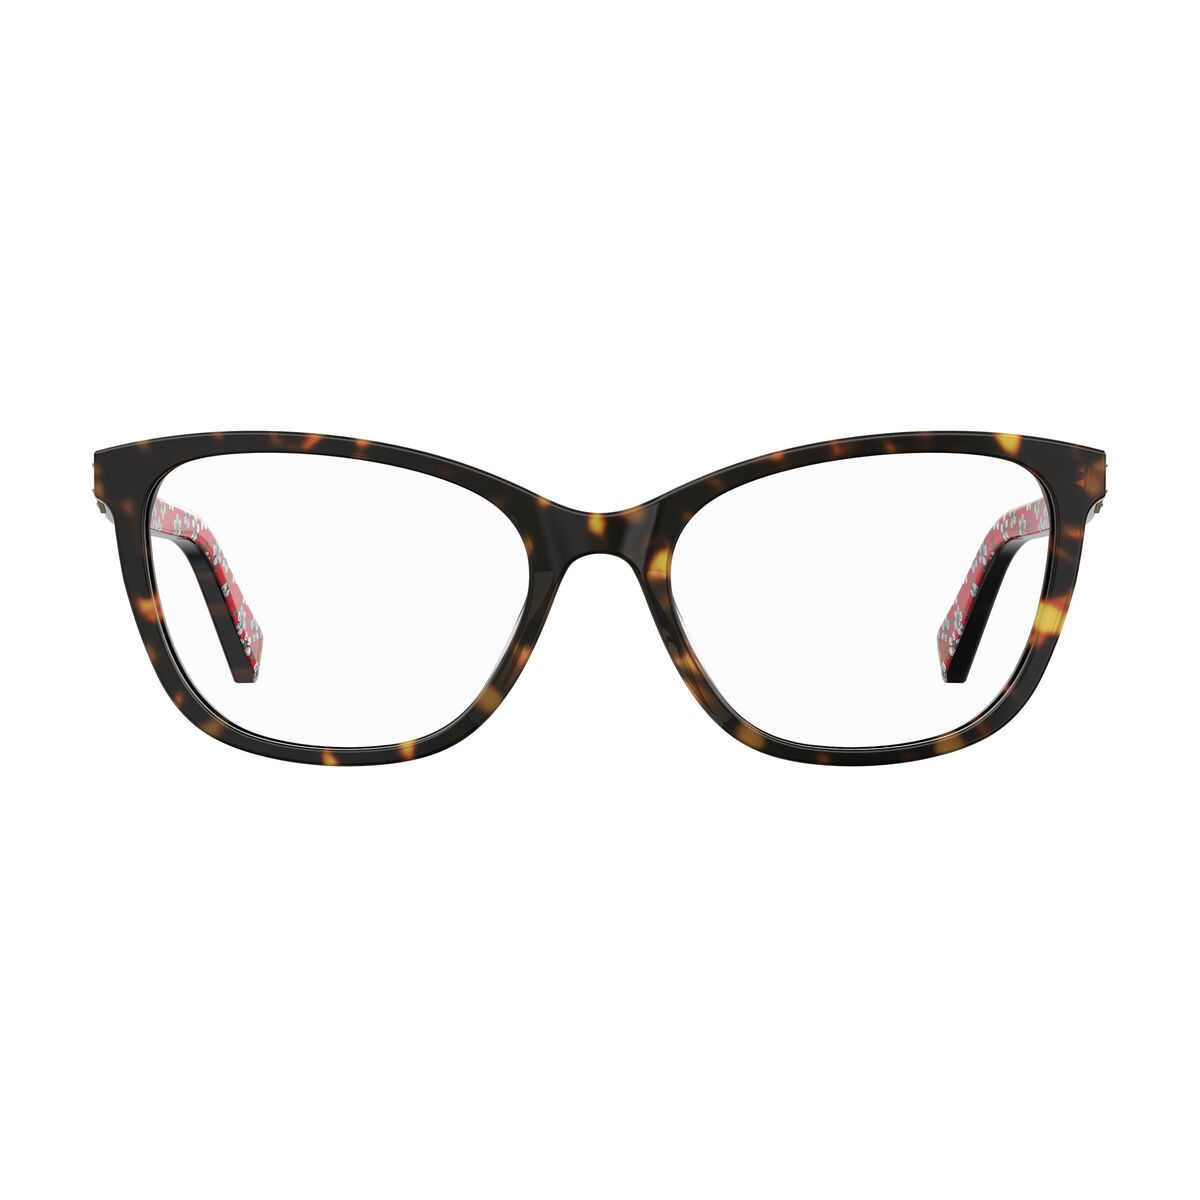 Ladies' Spectacle frame Love Moschino MOL575-086 Ø 53 mm